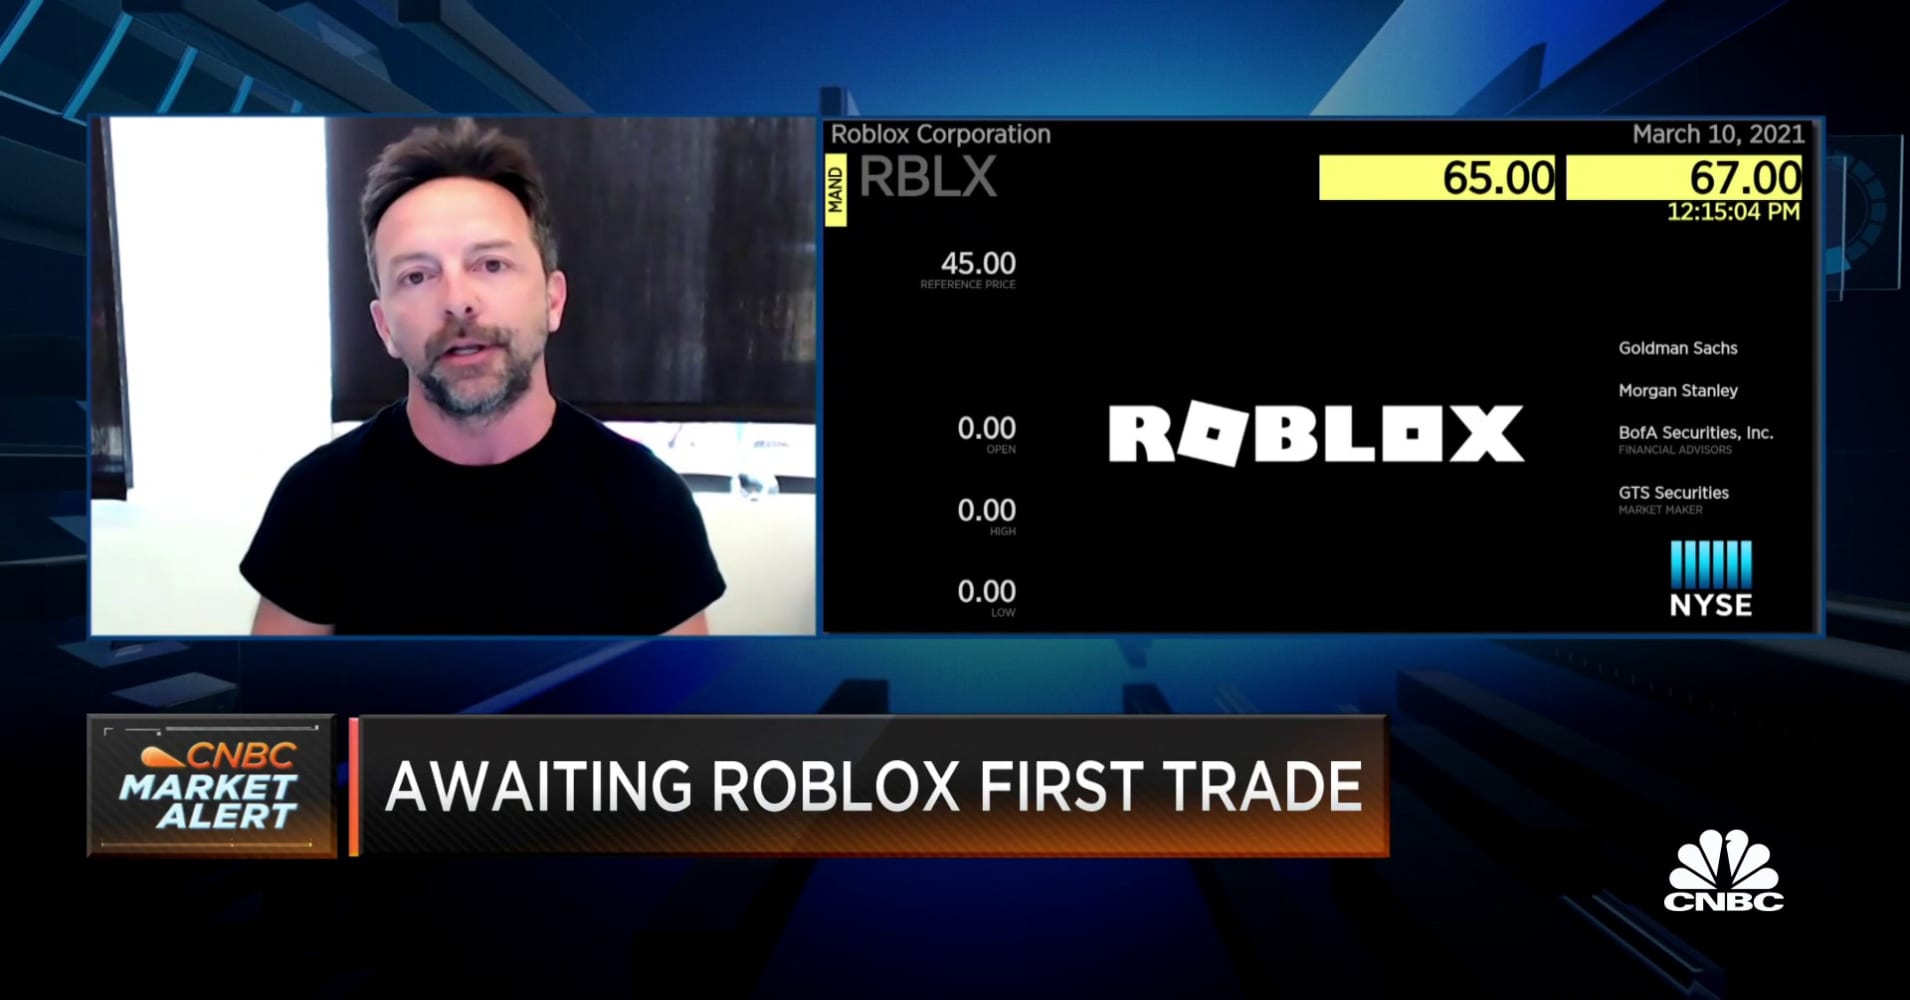 Roblox Rblx Goes Public With A Bet On The Metaverse - how to give your robux to a nbc member